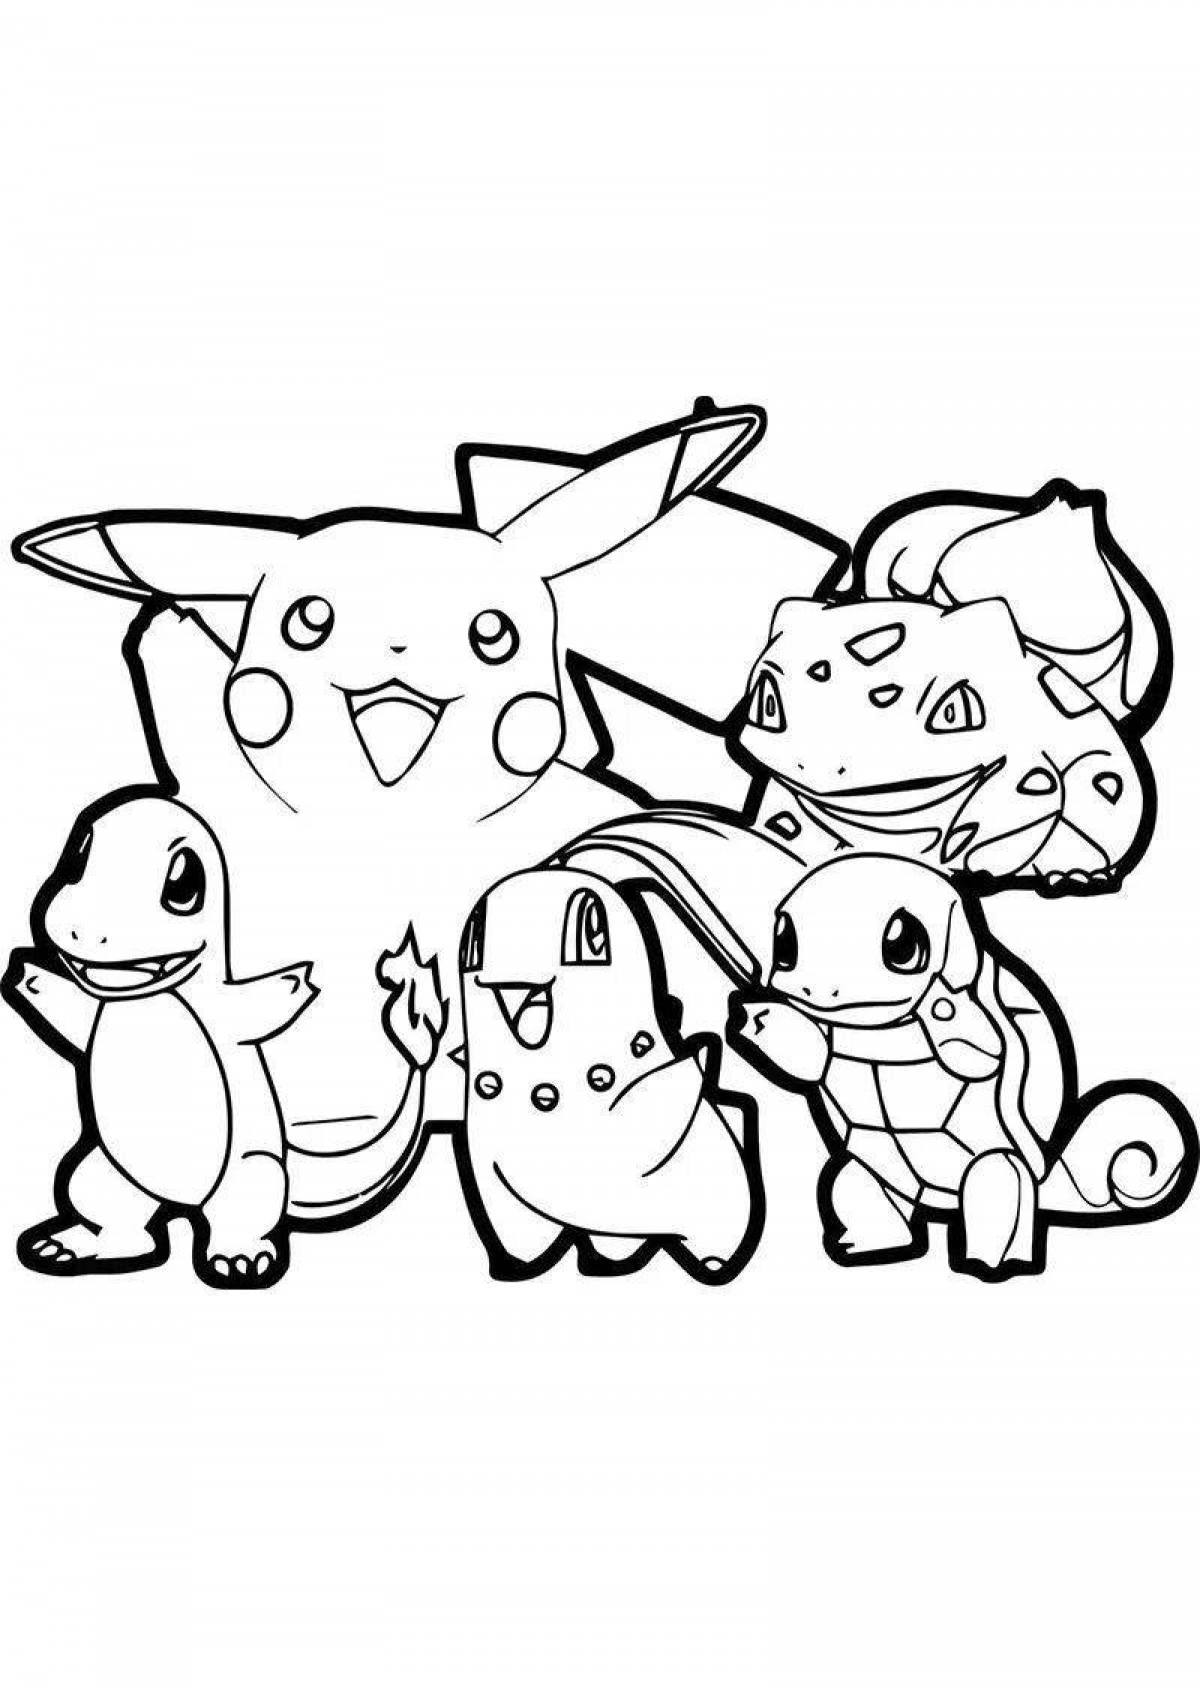 Happy pikachu and his friends